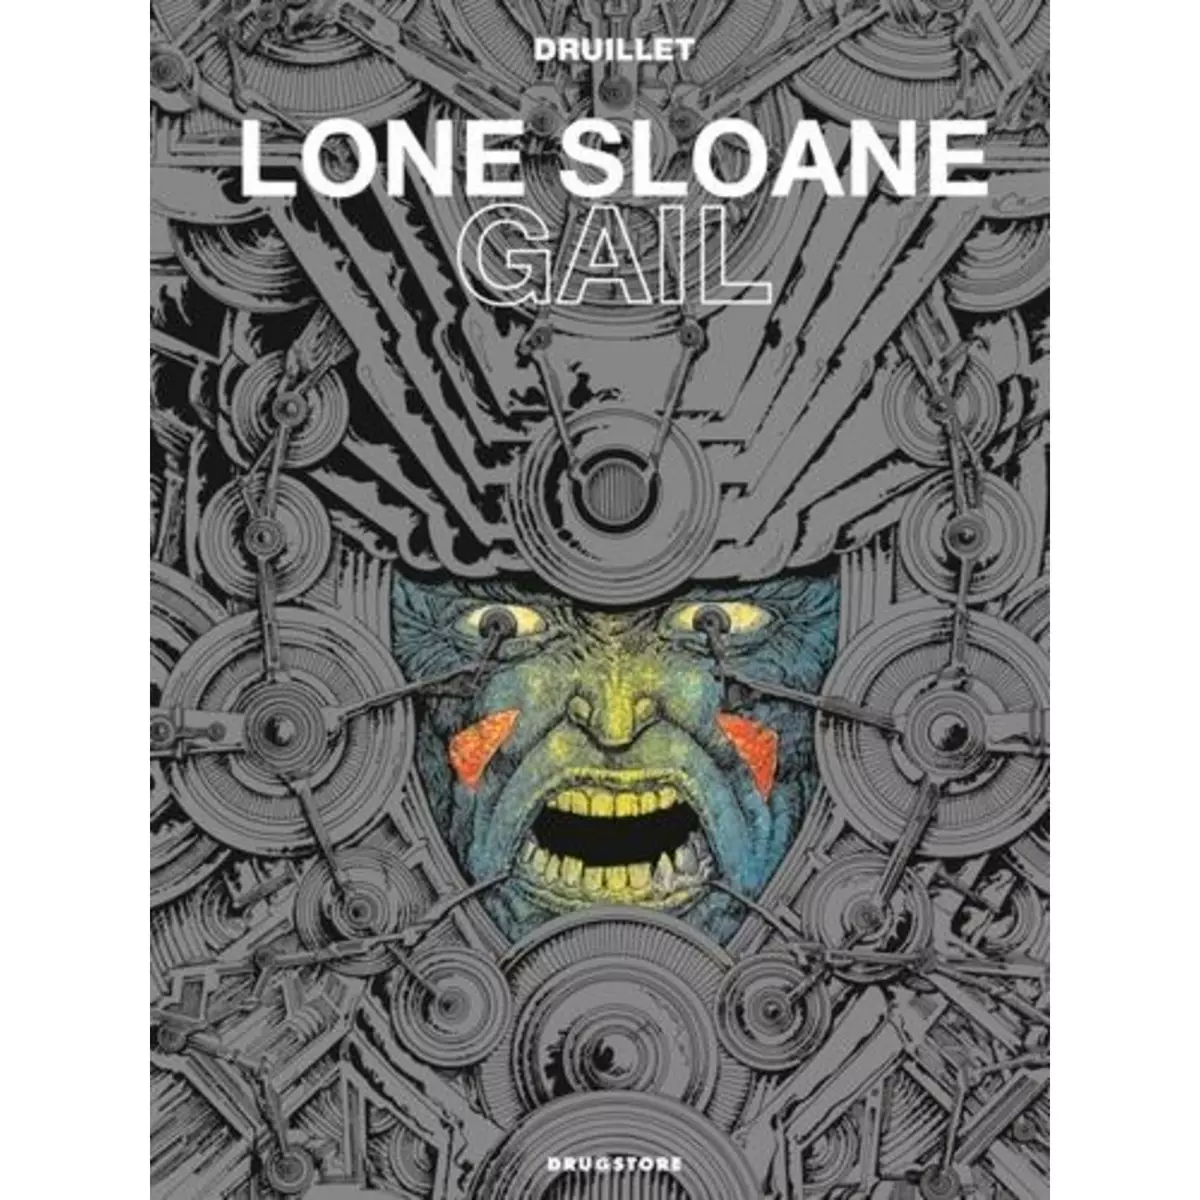  LONE SLOANE TOME 3 : GAIL, Druillet Philippe